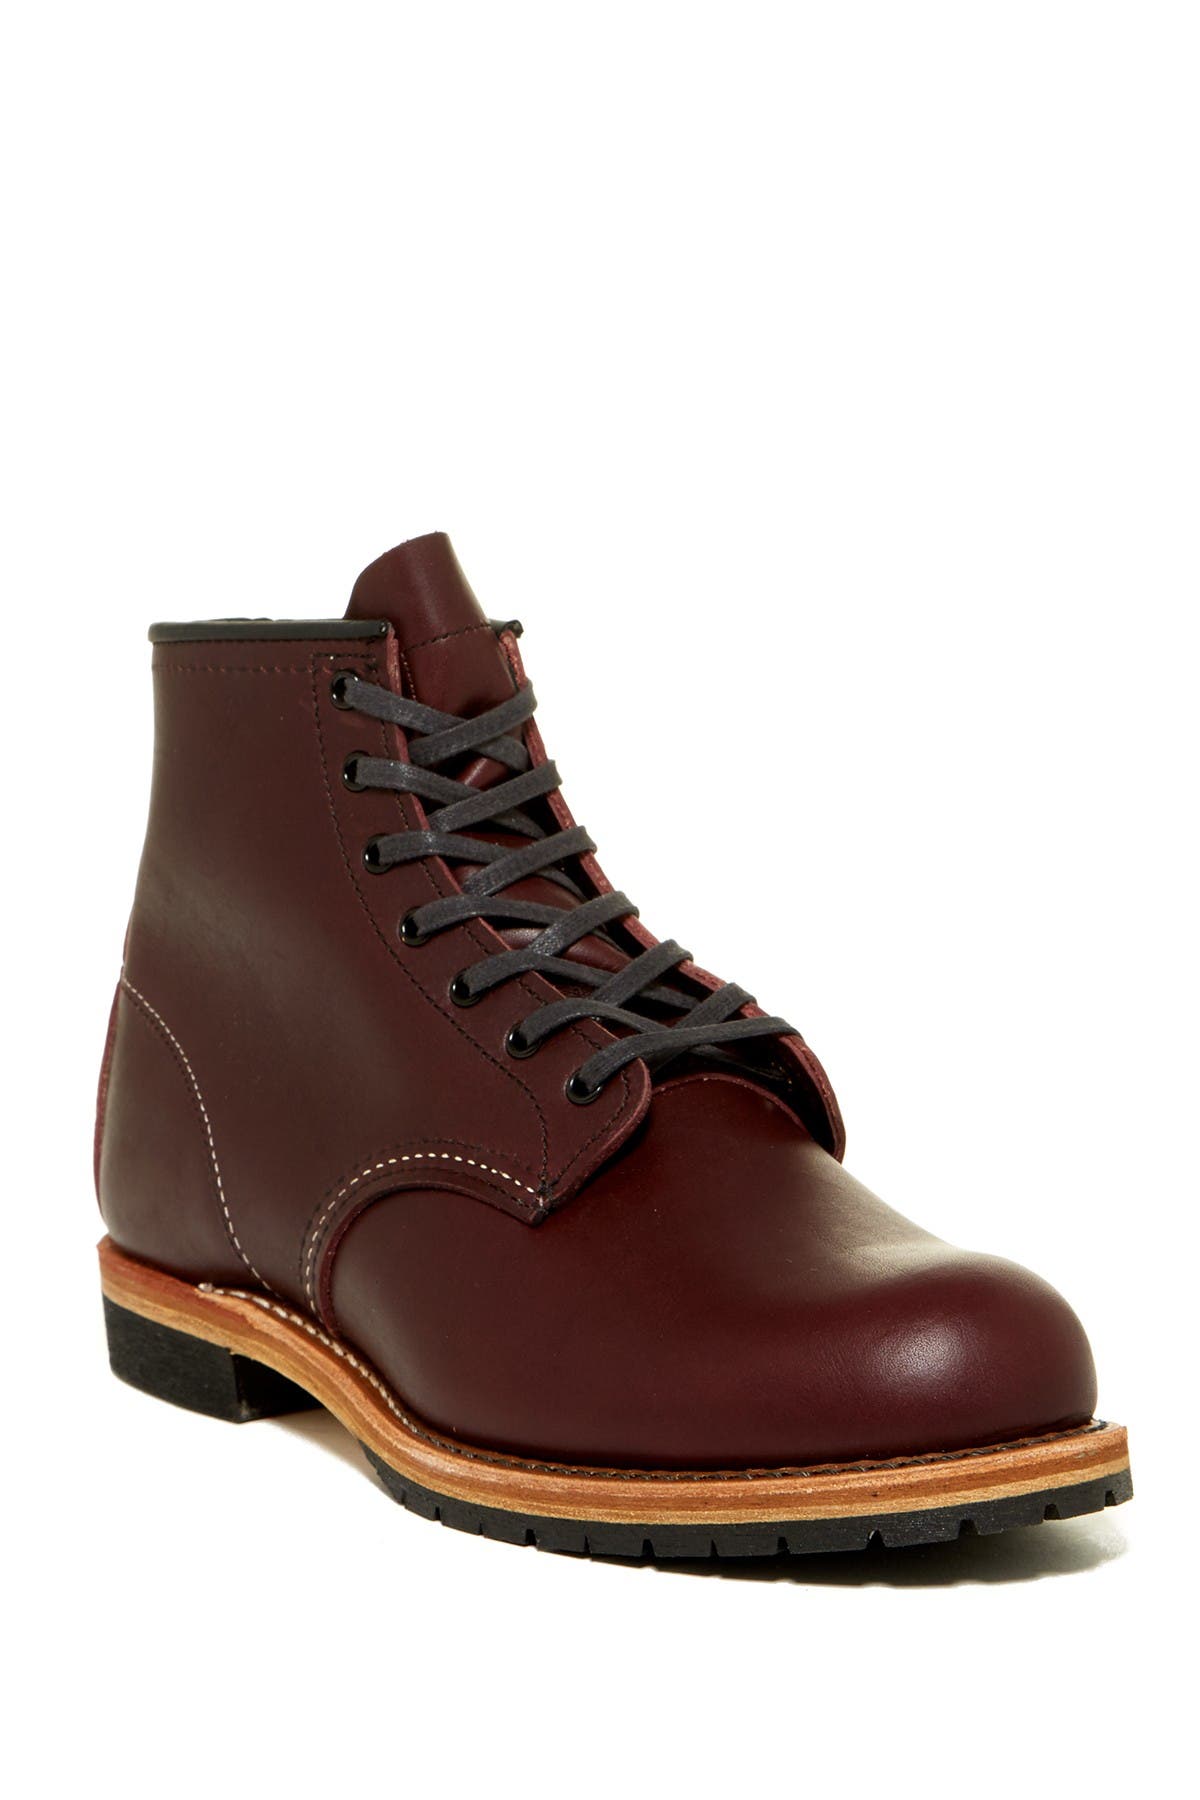 red wing beckman seconds